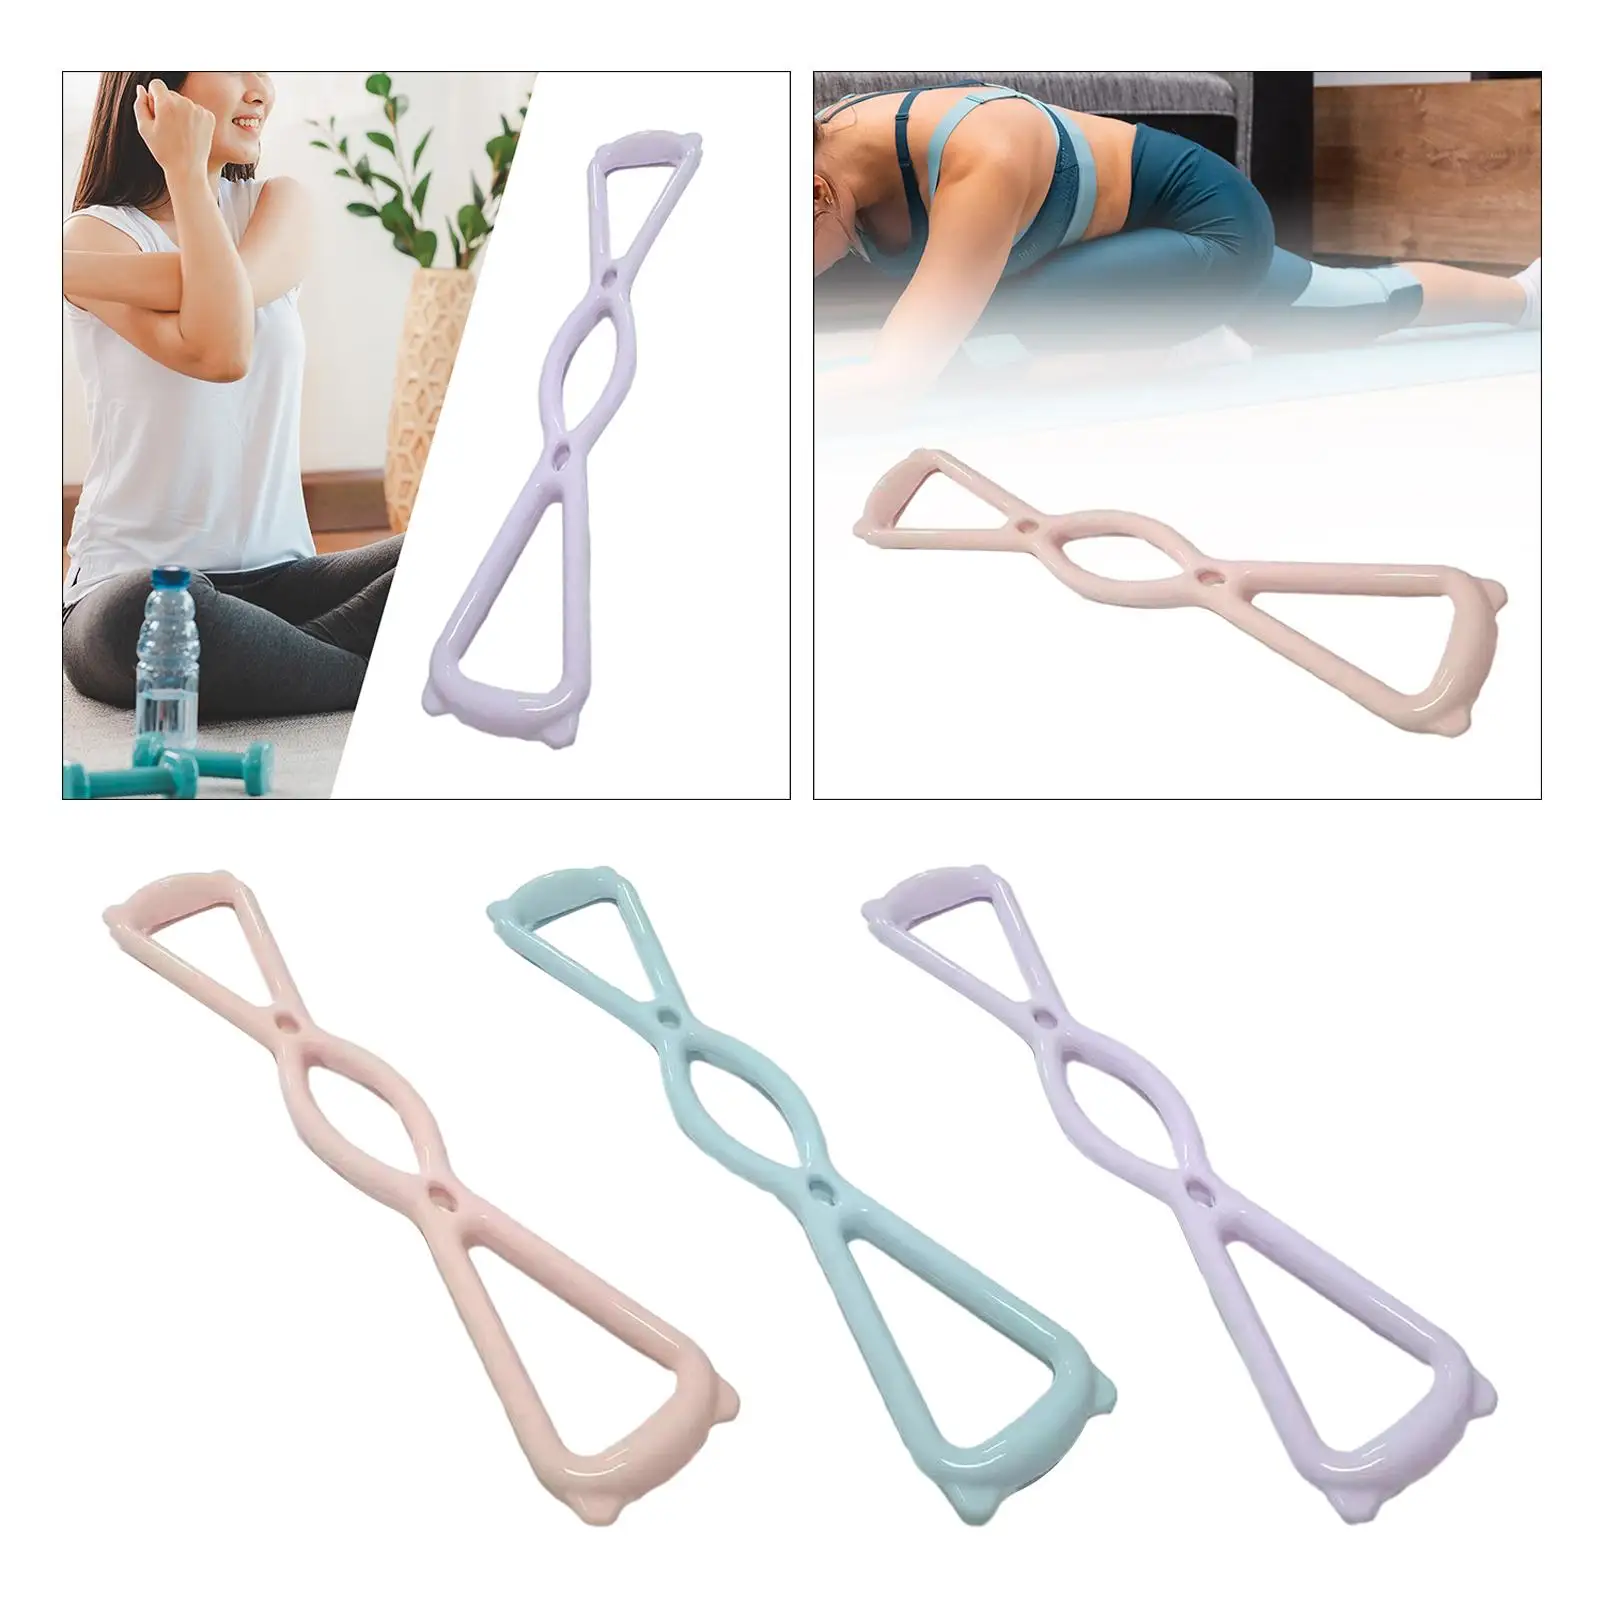 Exercise Band Workout Arms Pull up Rally Strap Pull Rope 8 Shaped Resistance Band for Exercising Yoga Women Men Pilates Fitness